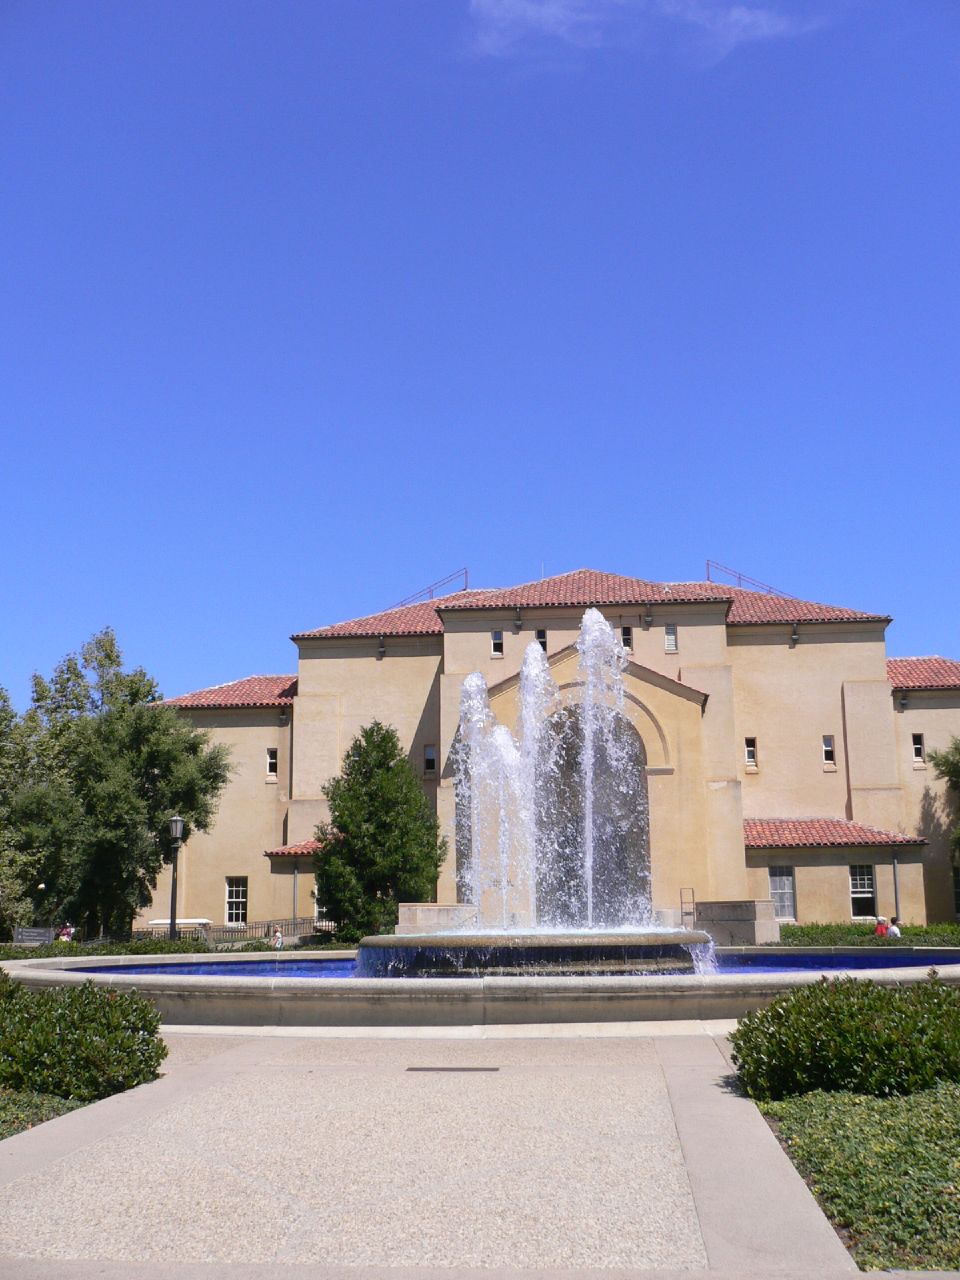 a fountain with many water features and plants in front of an orange colored building